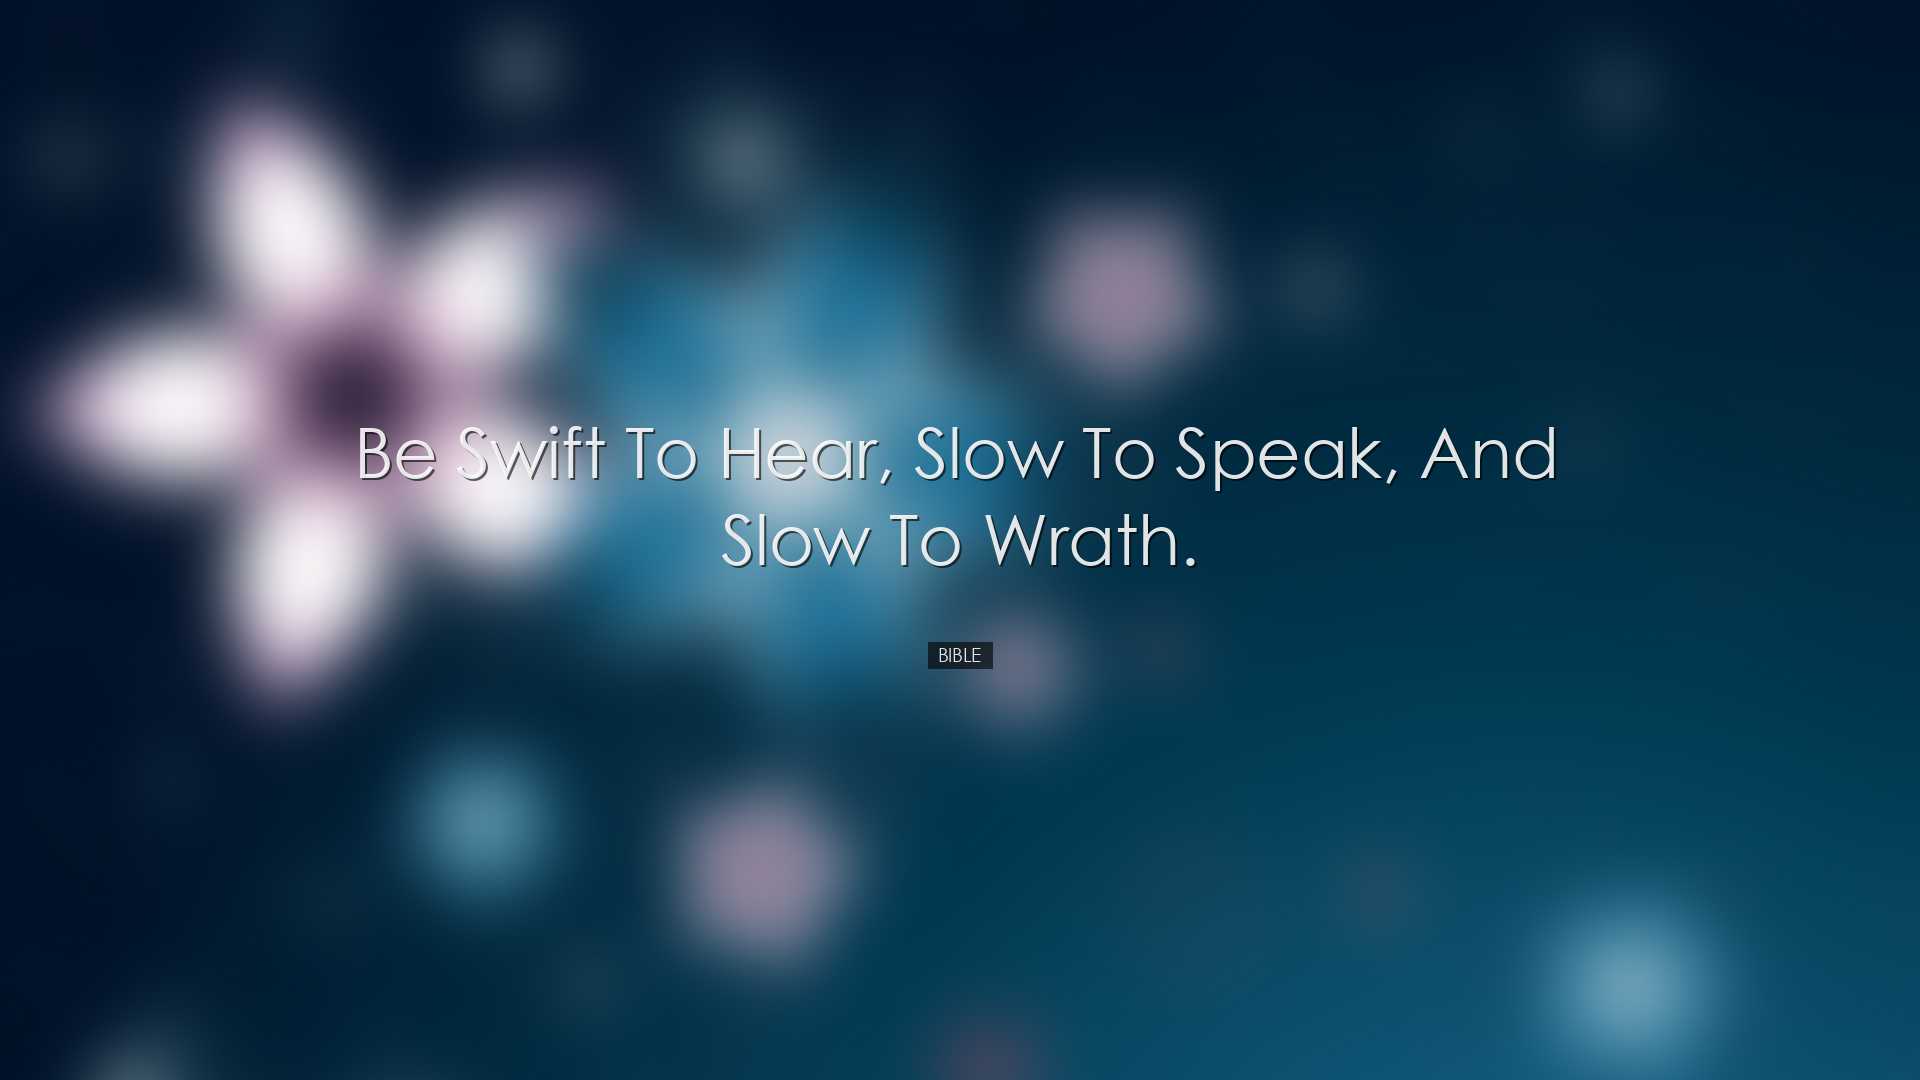 Be swift to hear, slow to speak, and slow to wrath. - Bible